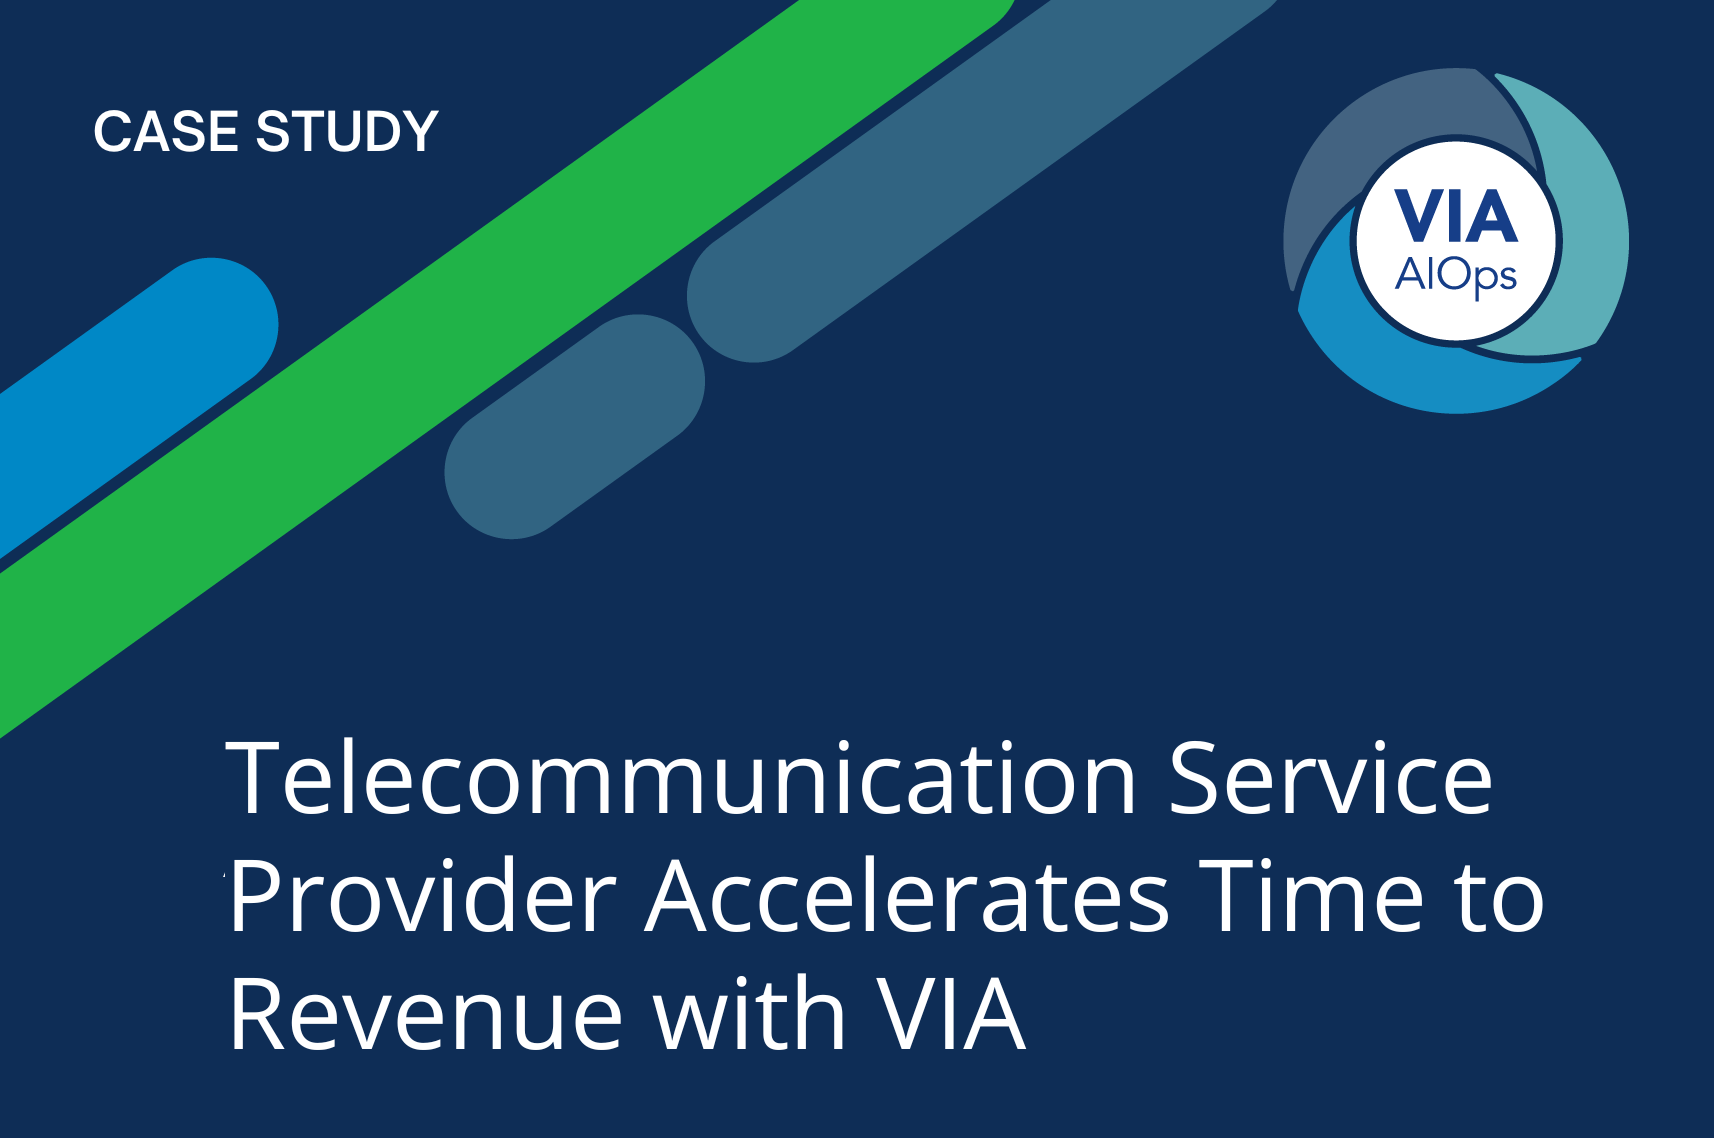 Telecommunication Service Provider Accelerates Time to Revenue with VIA